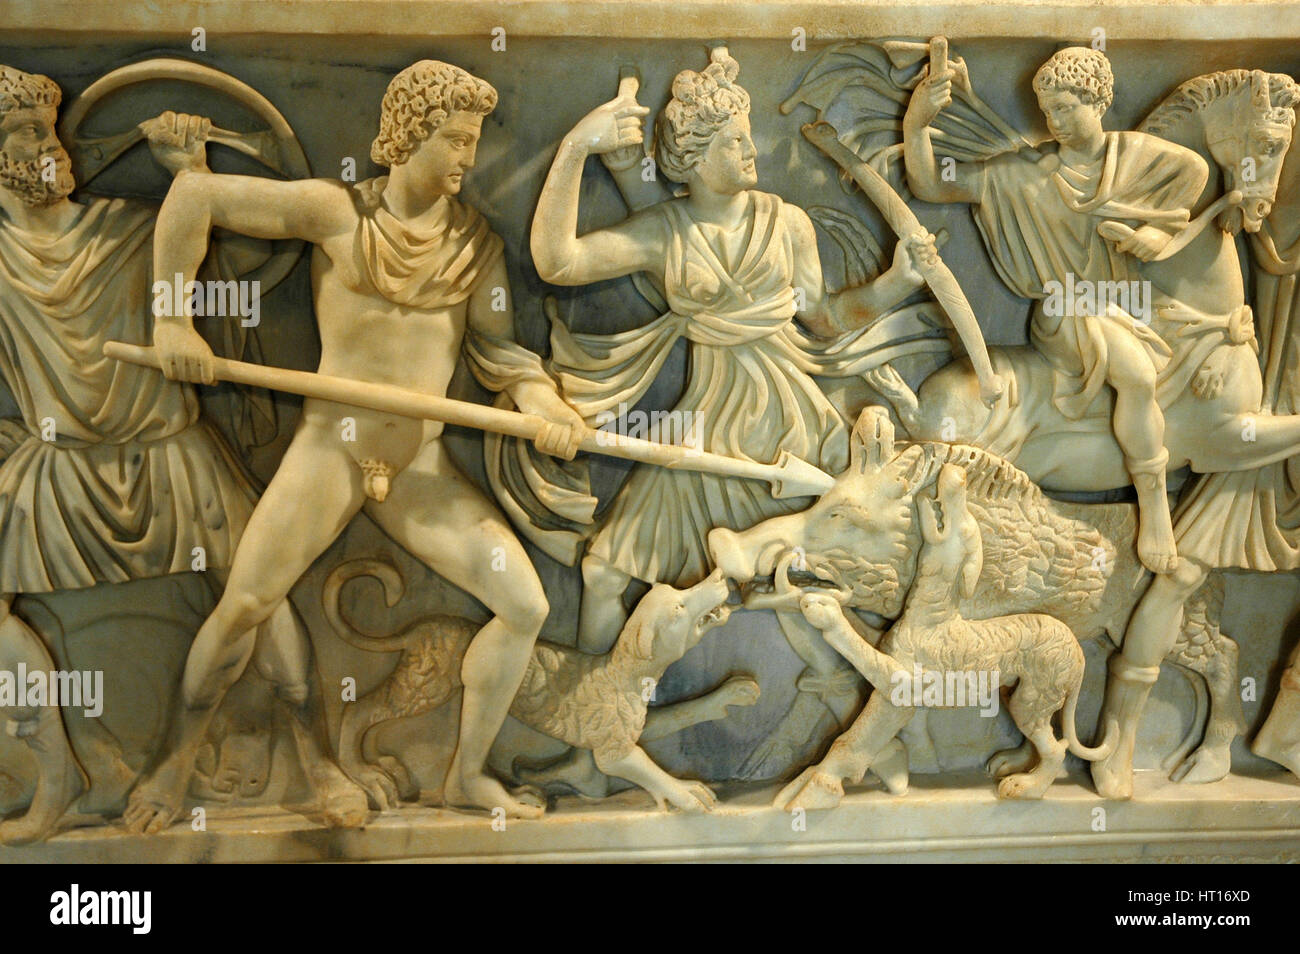 Roman sarcophagus with relief of the Calydonian Boar Hunt.  According to Greek mythology the Calydo Artist: Werner Forman. Stock Photo